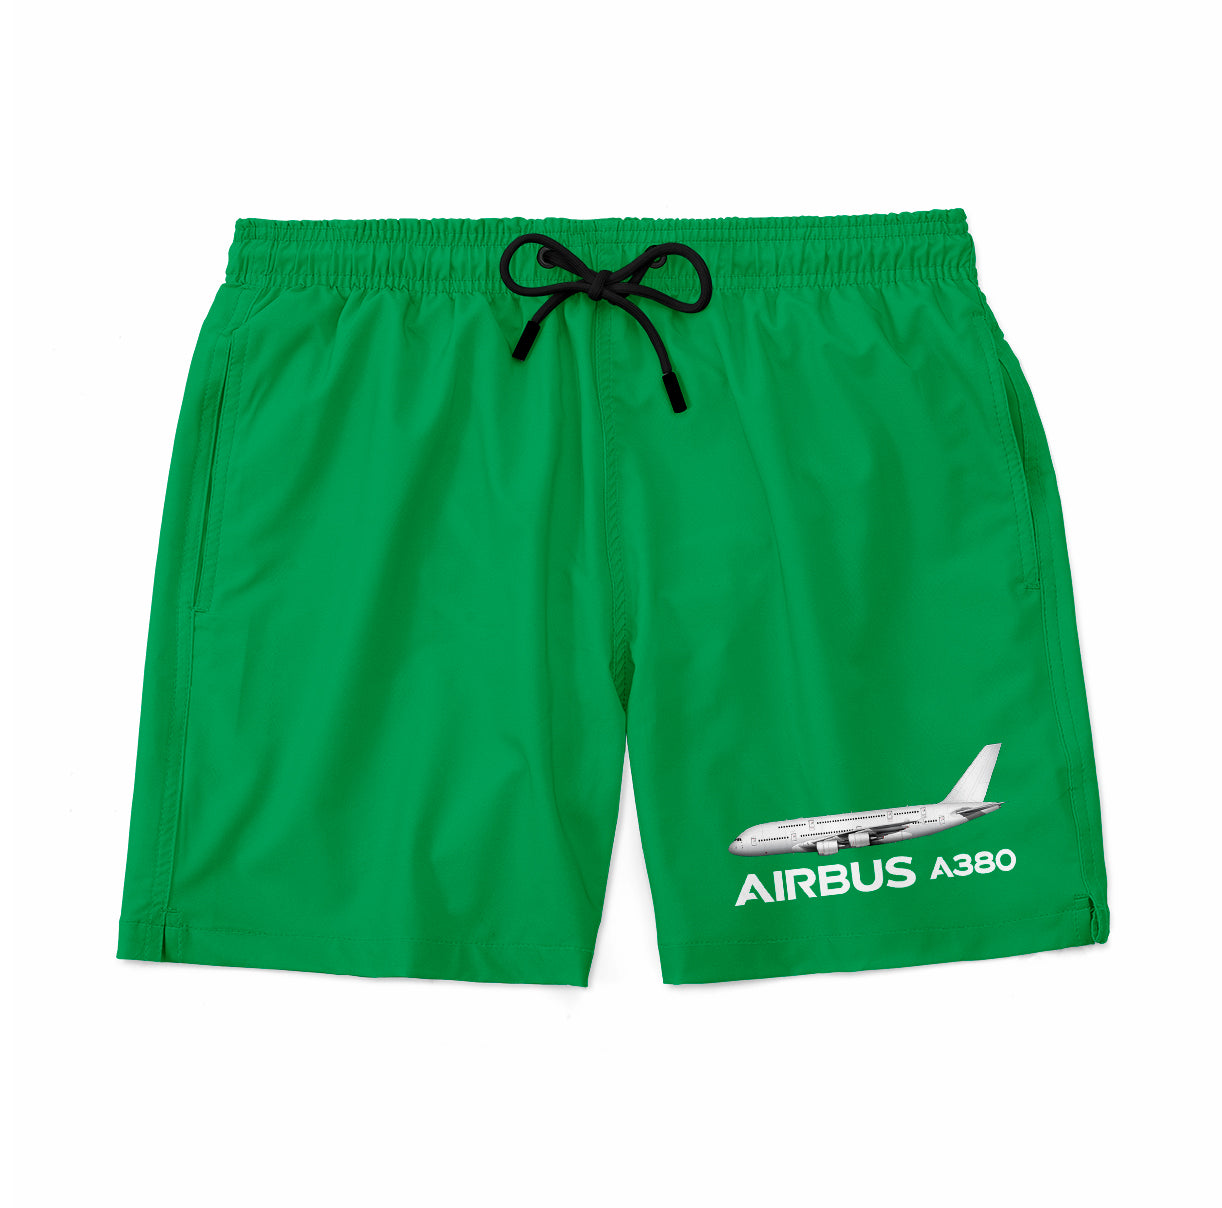 The Airbus A380 Designed Swim Trunks & Shorts